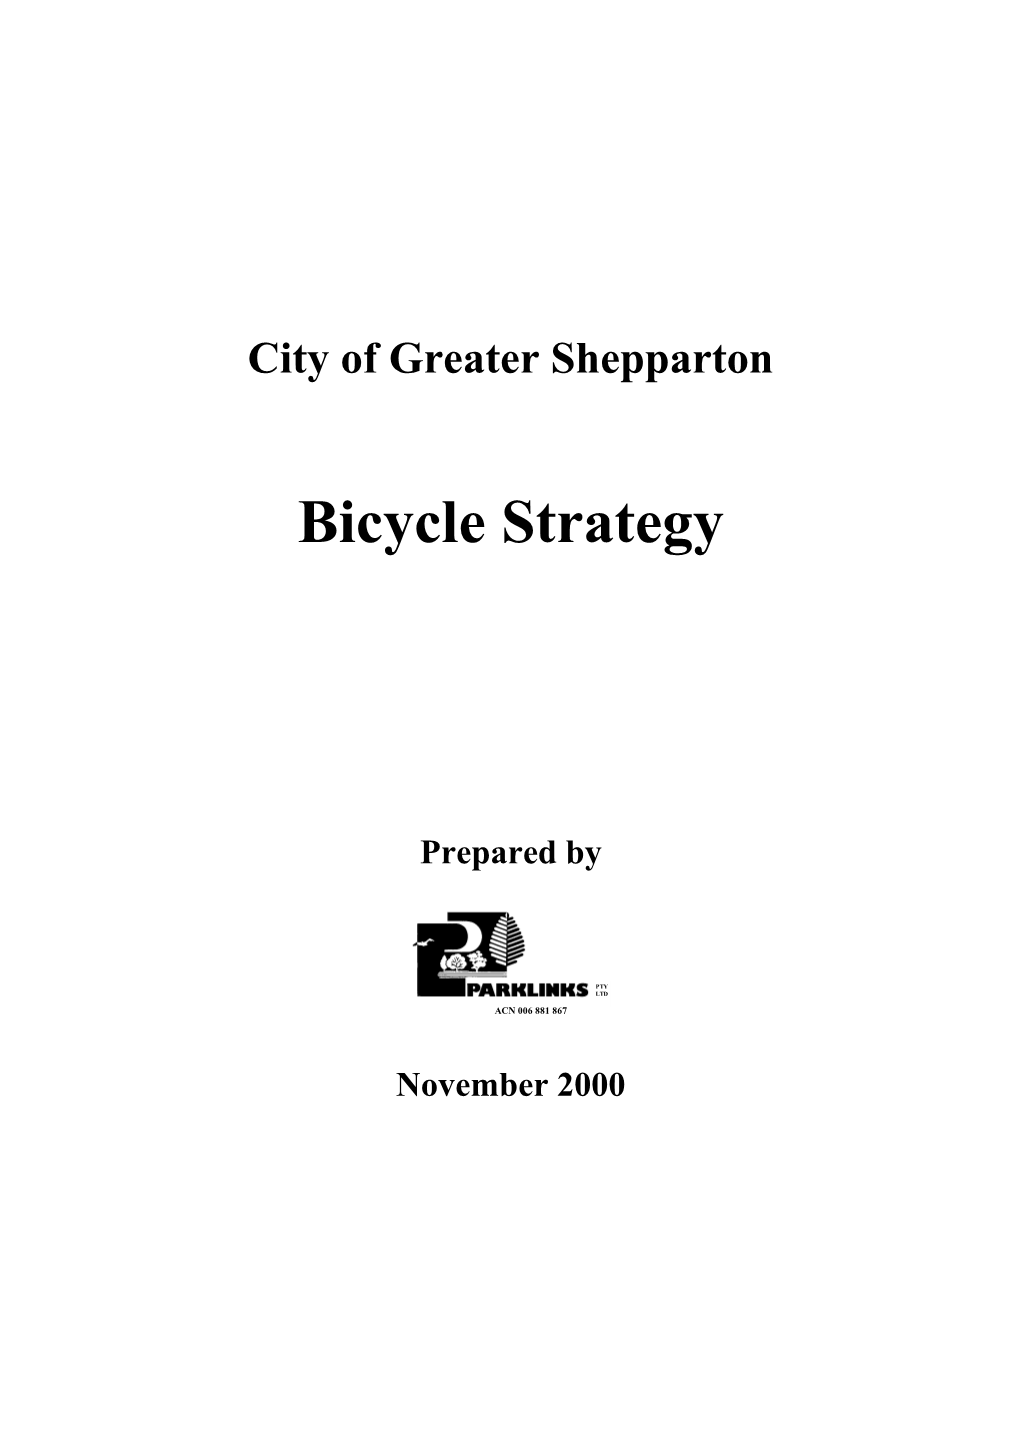 Bicycle Strategy